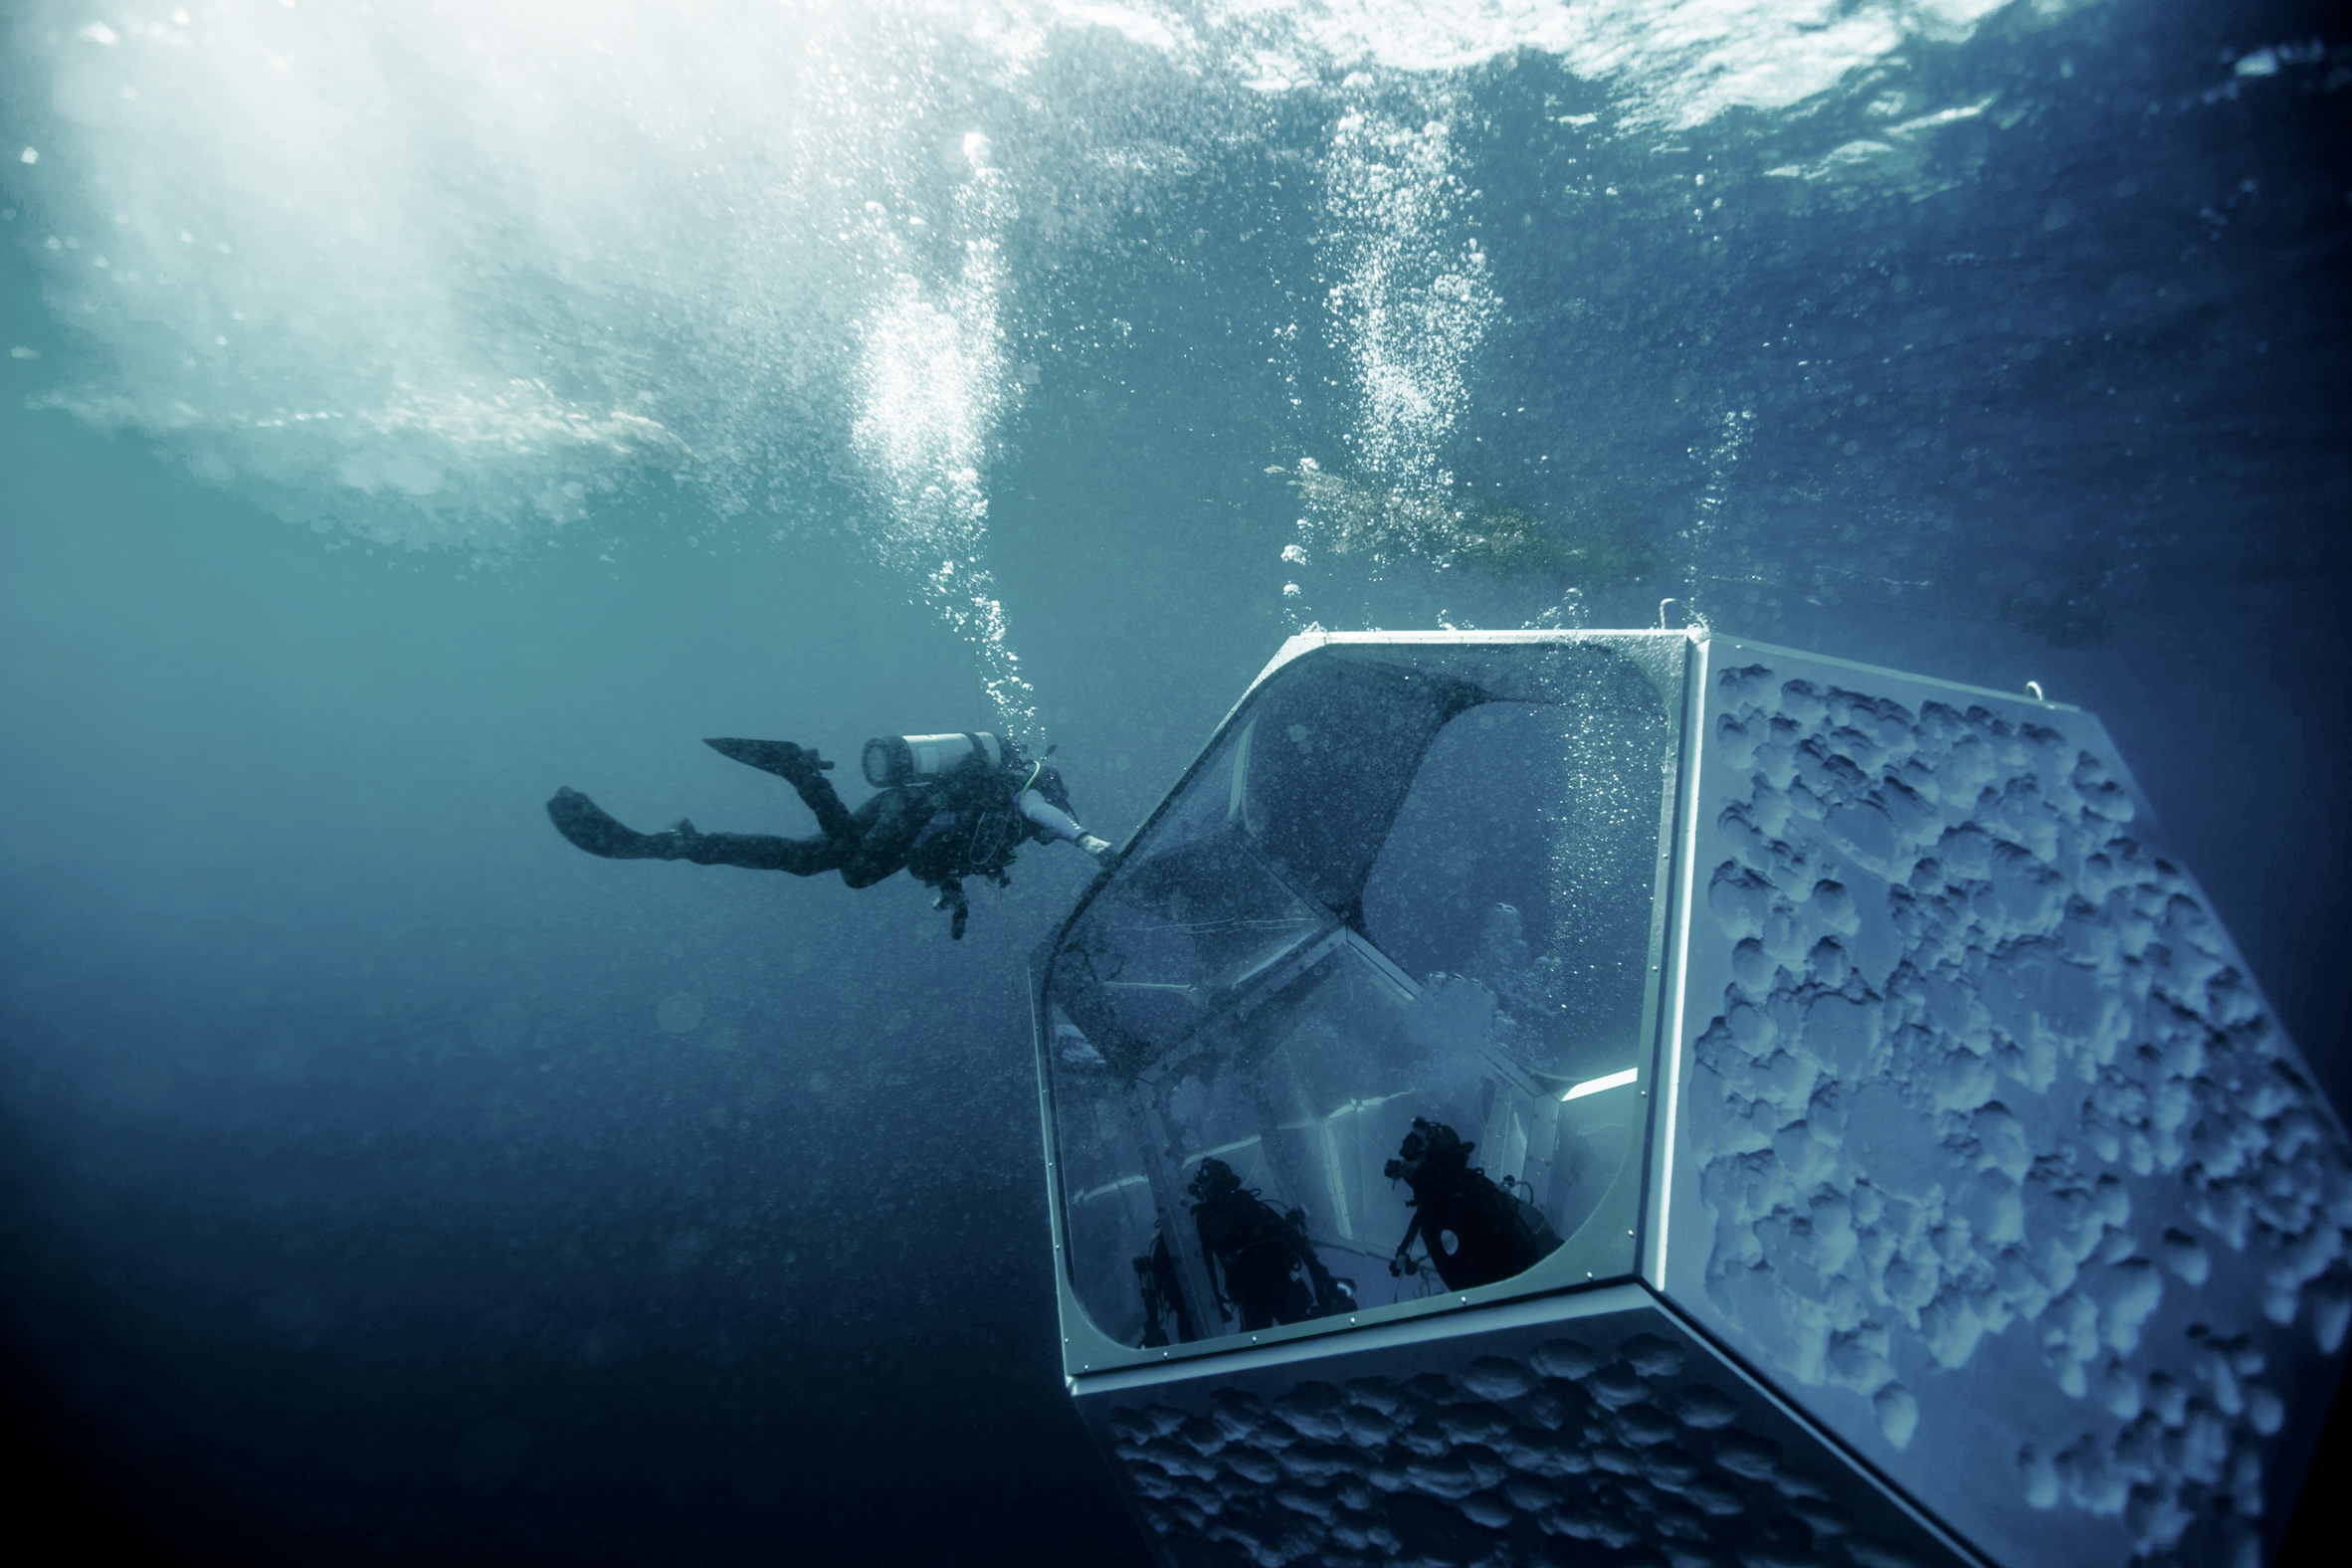 Artist Doug Aitken collaborated with Parley for the Oceans